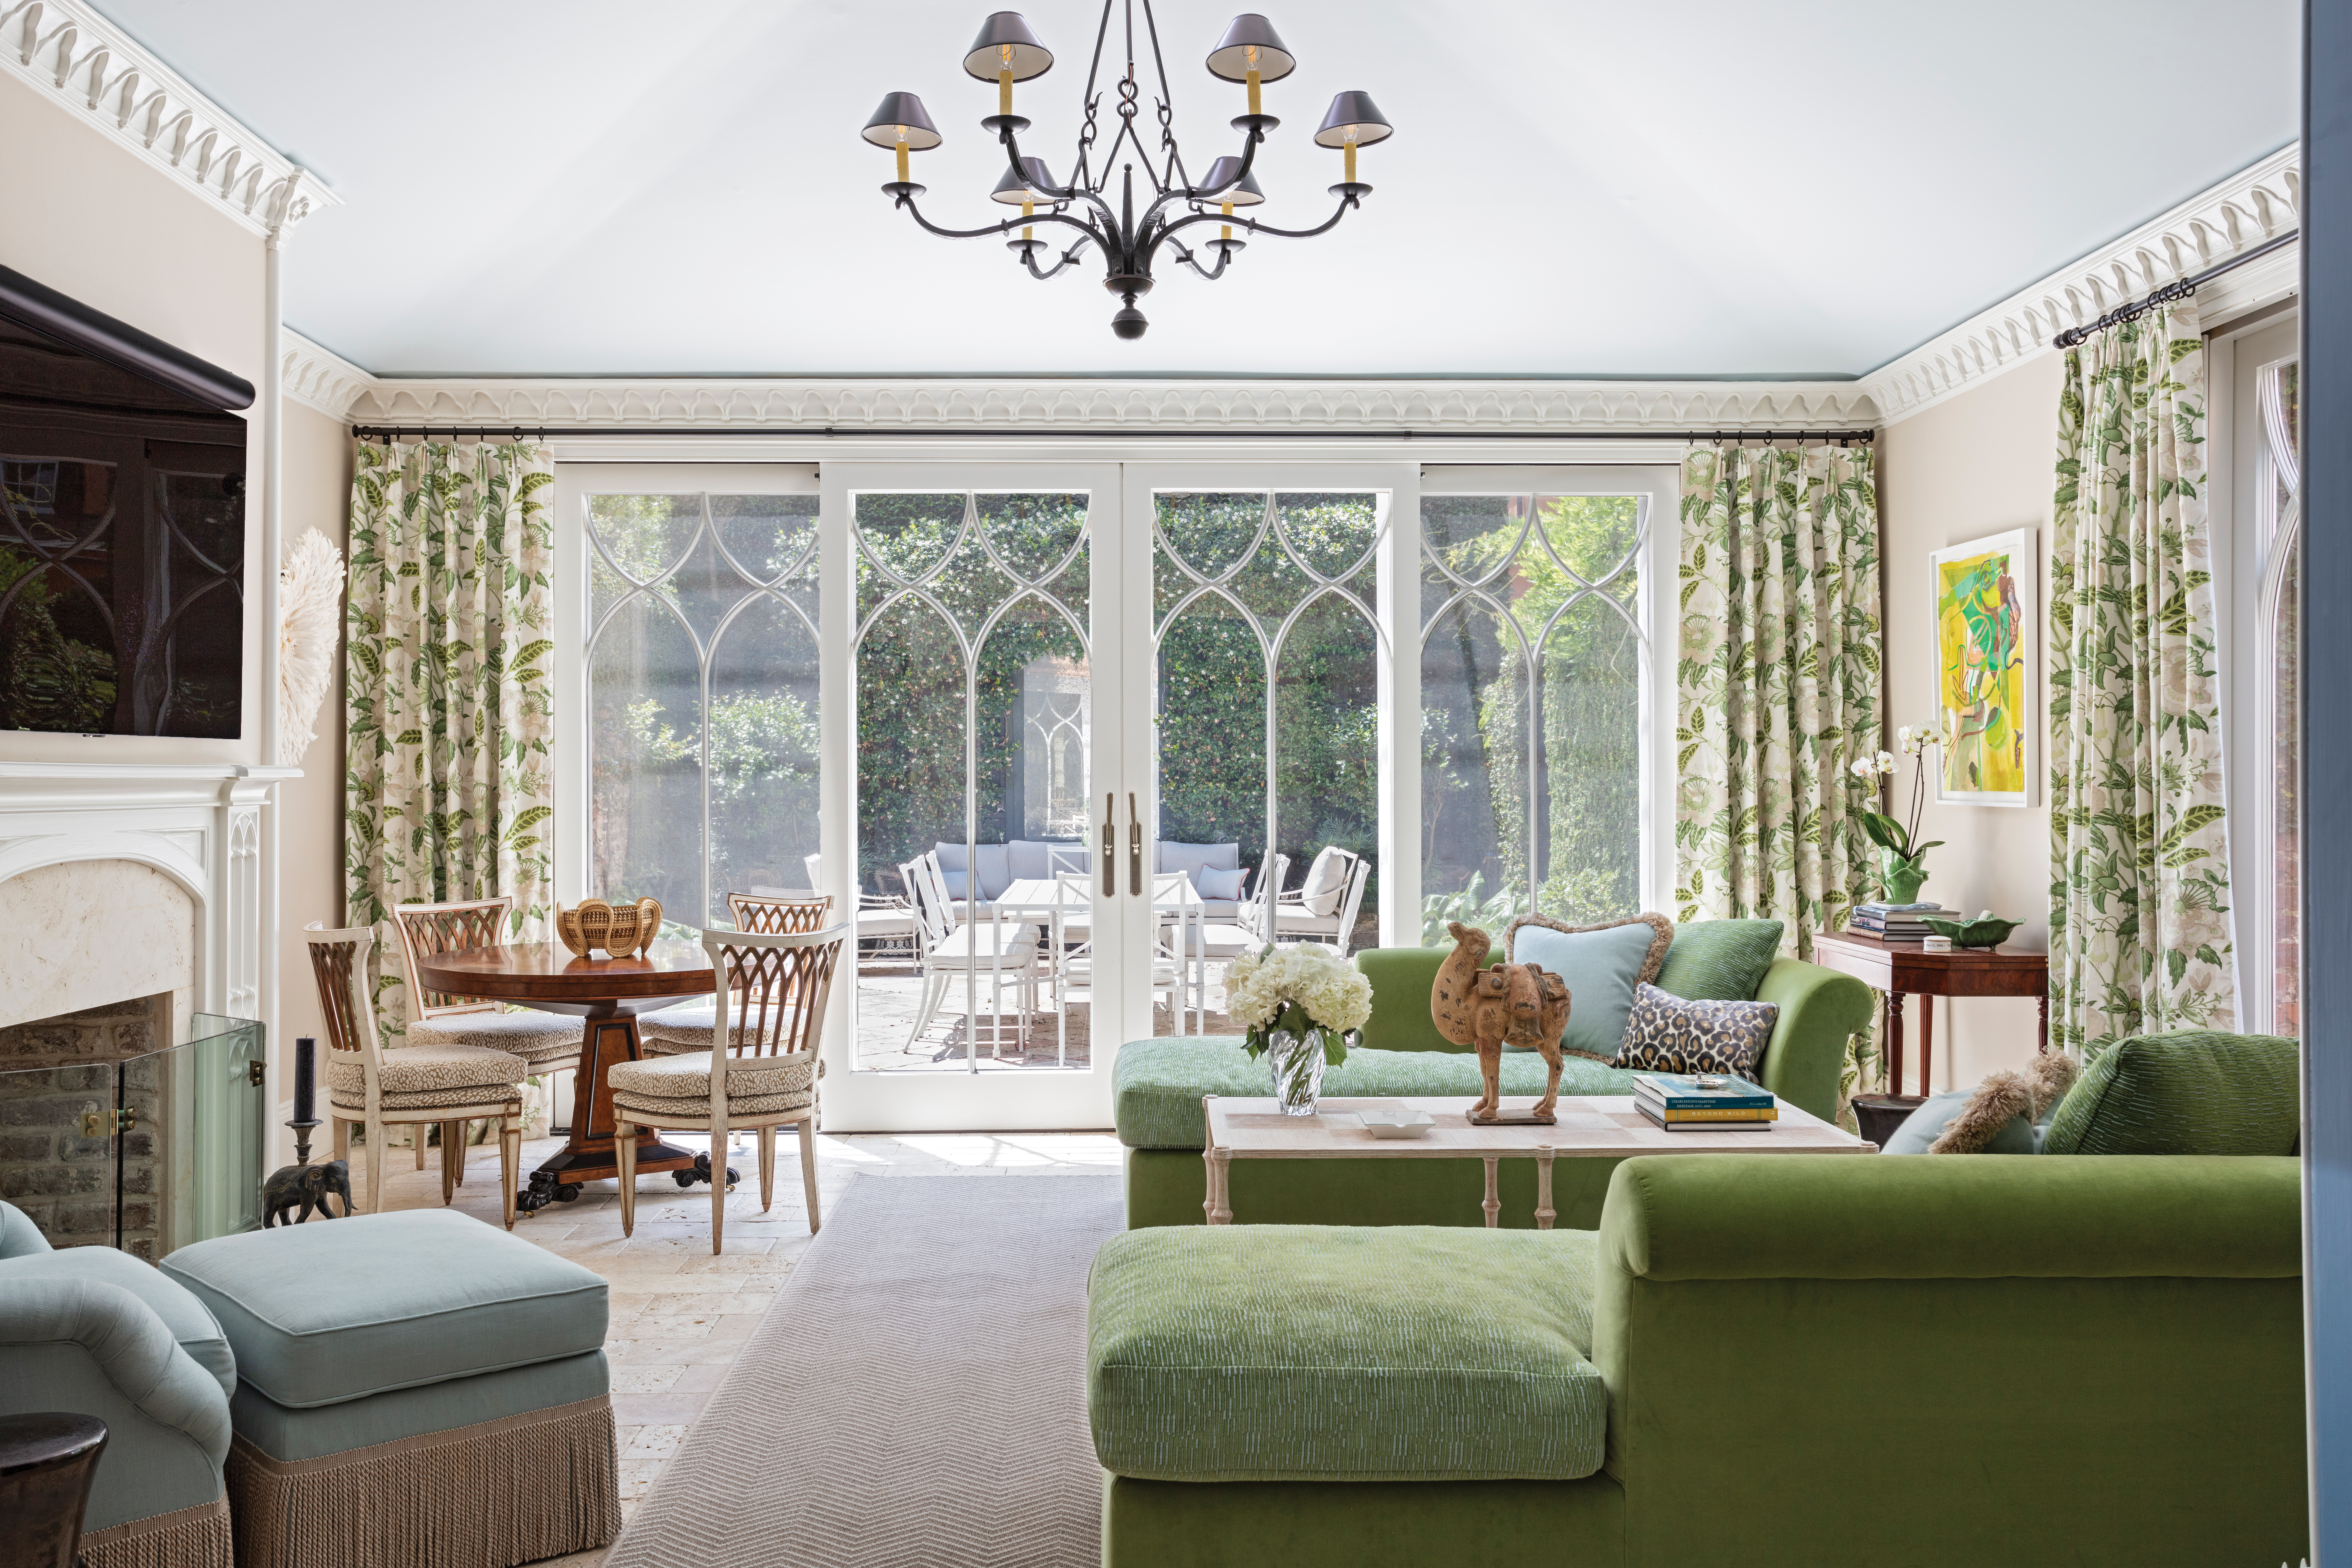 Verdant Views: The garden room, a 21st-century addition, has a bigger brighter feel. Here, Killian opted for lighter colors on the walls and ceiling balanced with deep green velvet fabrics on the chaises and delightful Lee Jofa “Davenport Print” linen curtains in “Greenery.”